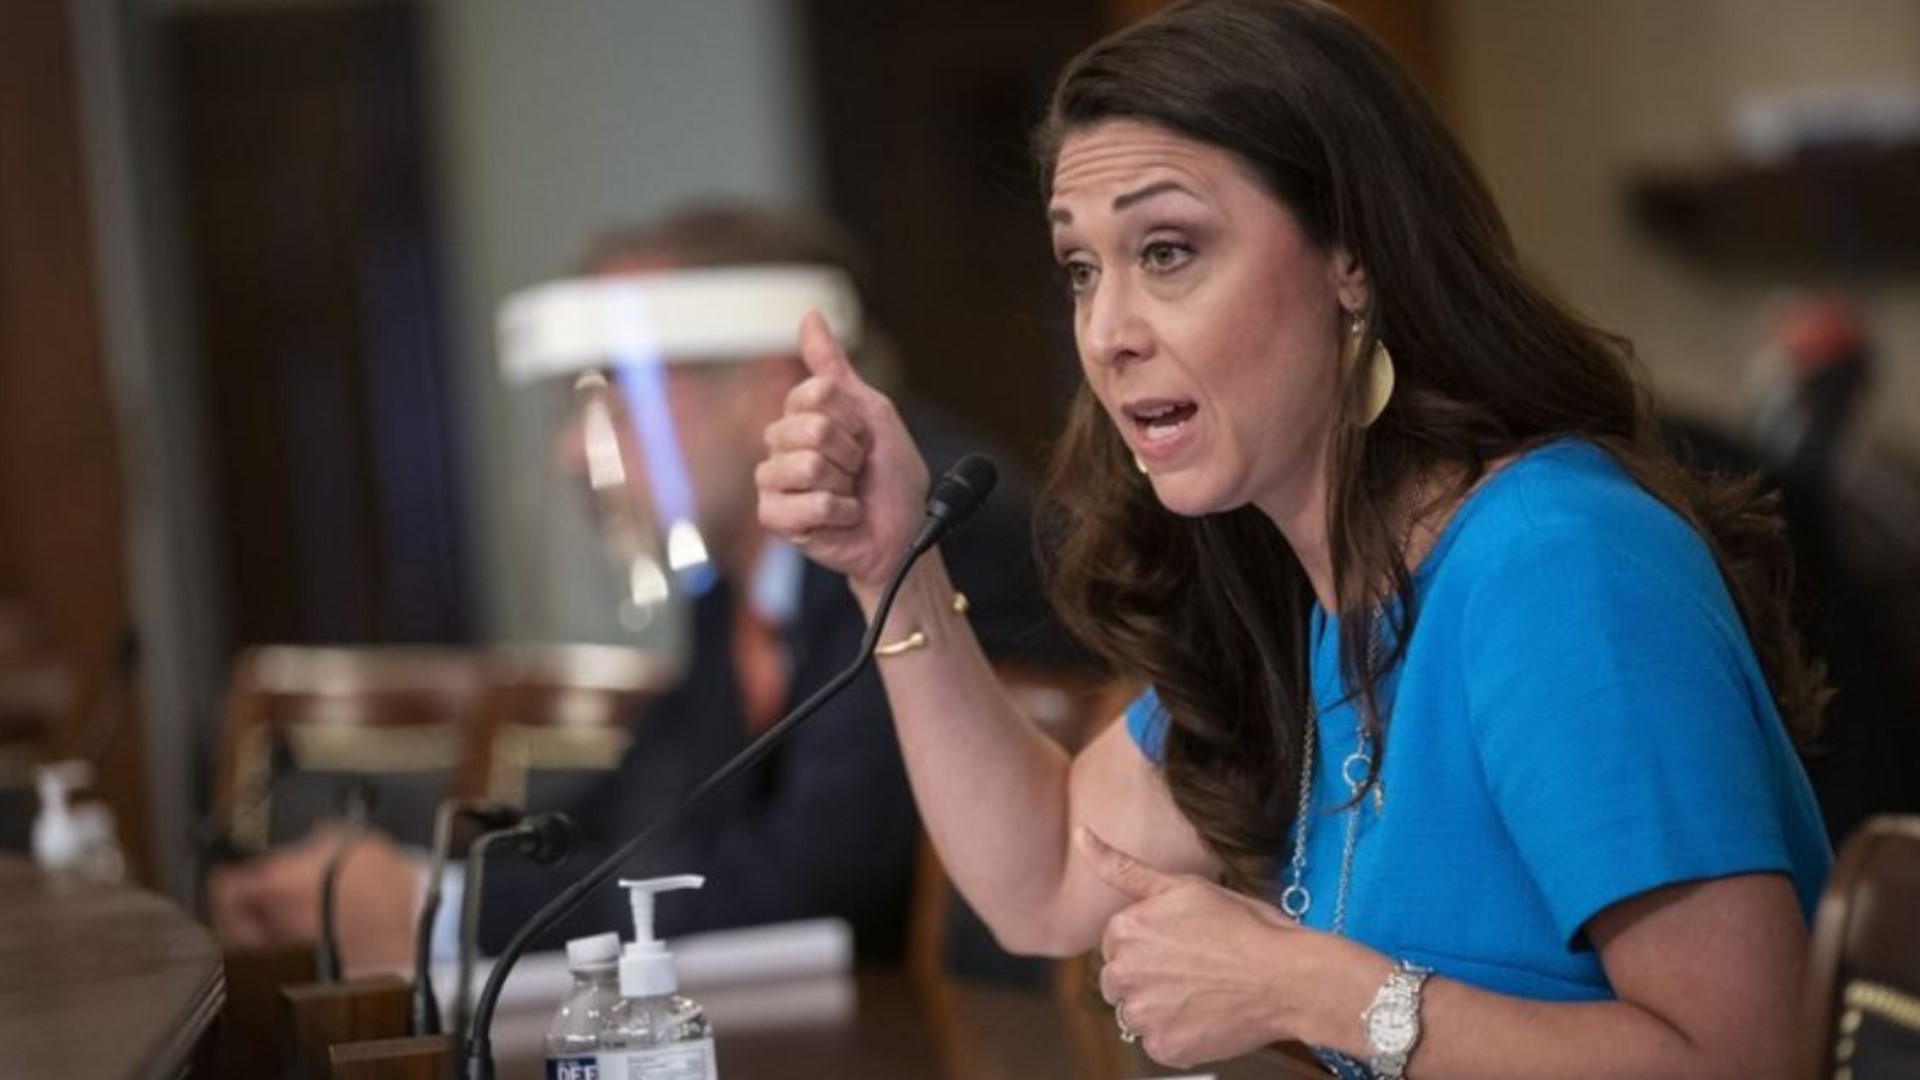 Rep. Jaime Herrera Beutler, R-Wash., told a Feb. 8 town hall about efforts to get President Donald Trump to call off his supporters during the Capitol riot.